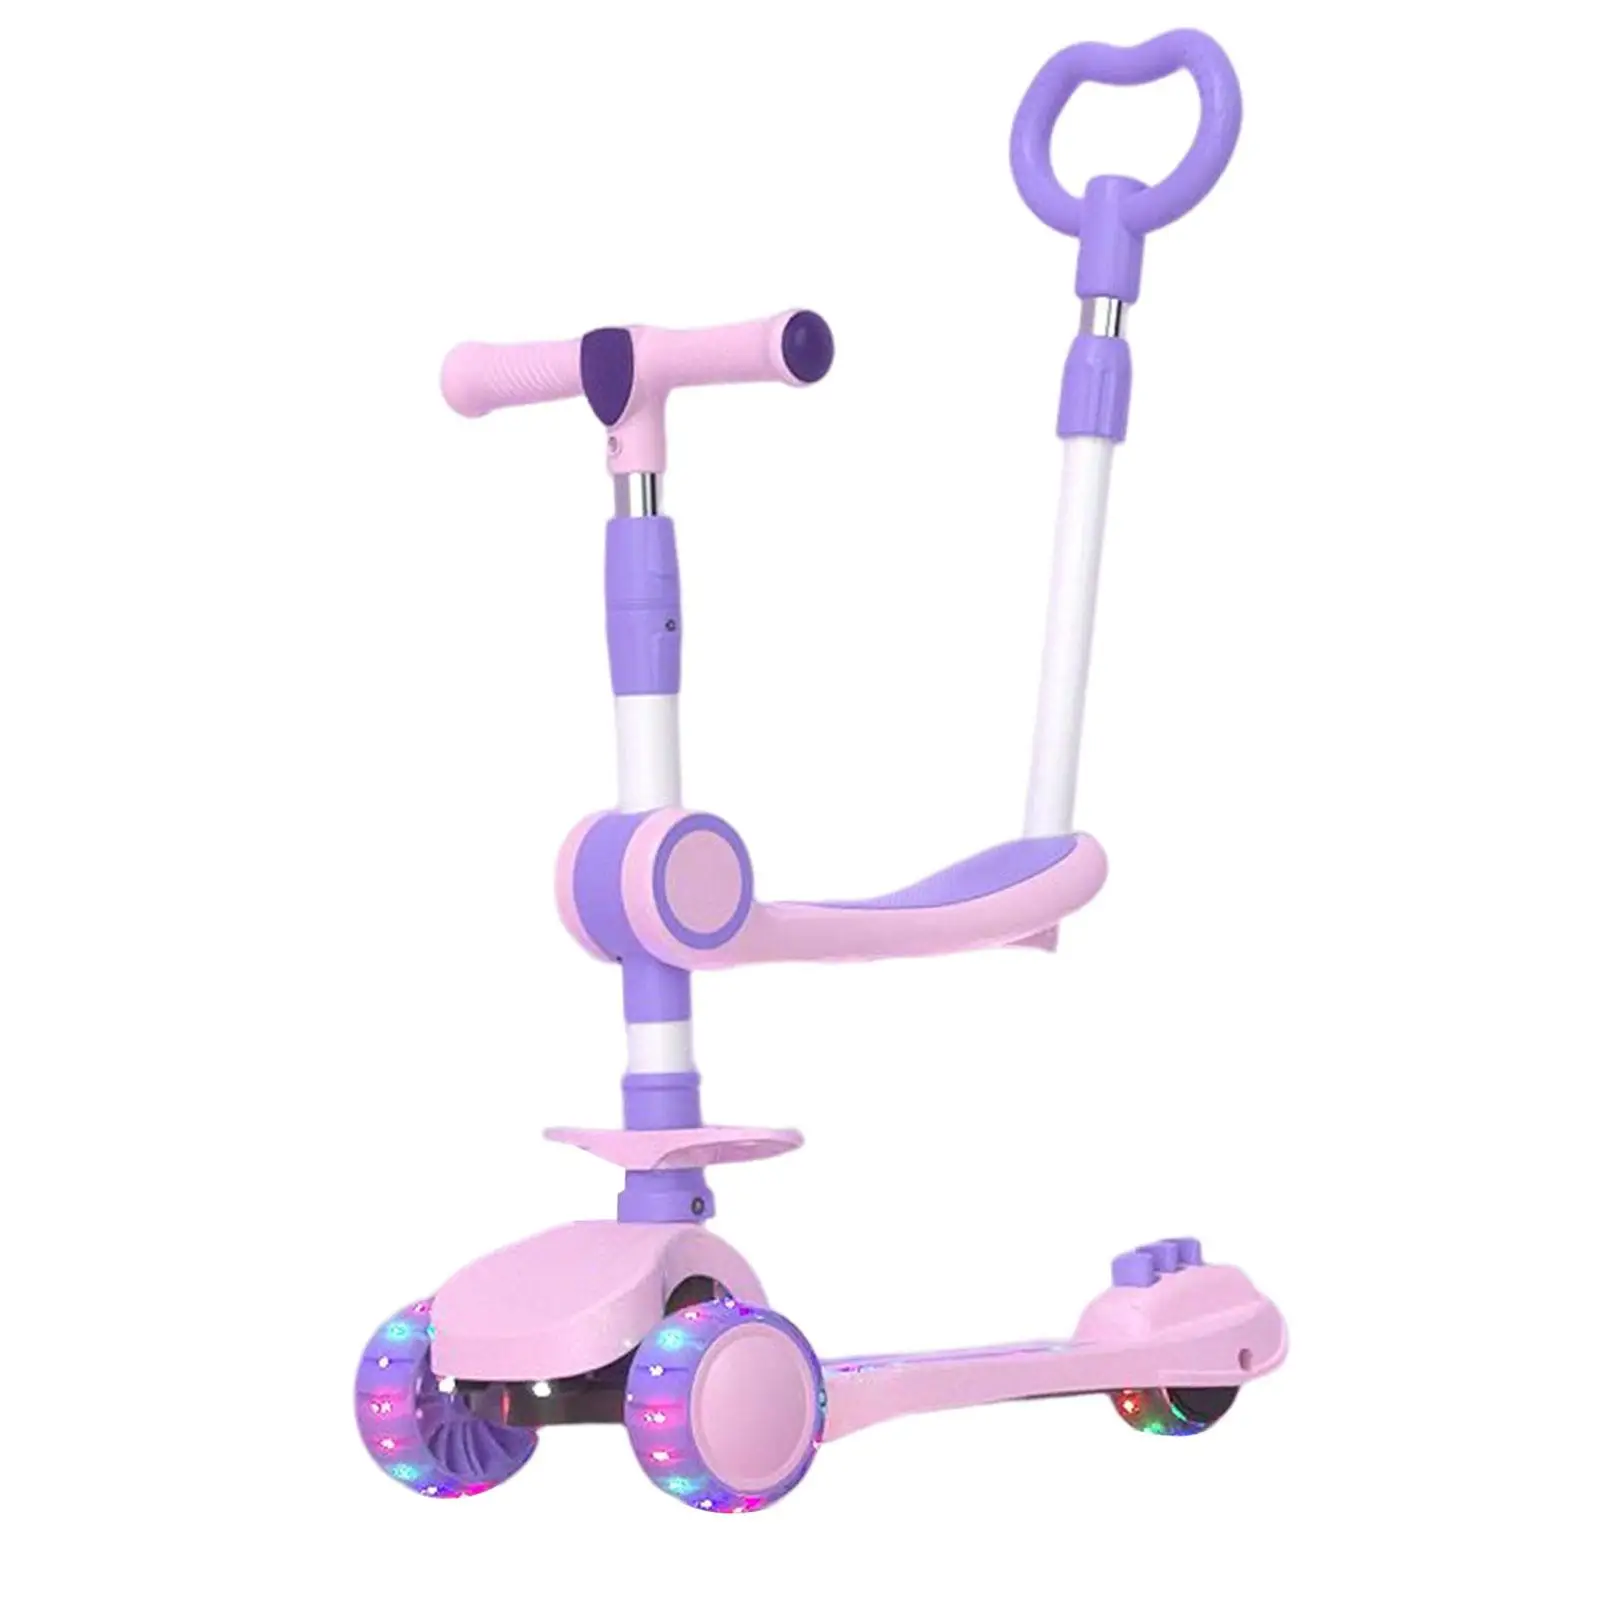 Kick Scooter 4 Level Adjustable Height Stable 2 to 12 Years Old Kids Scooter for Park Game Activity Patio Outdoor